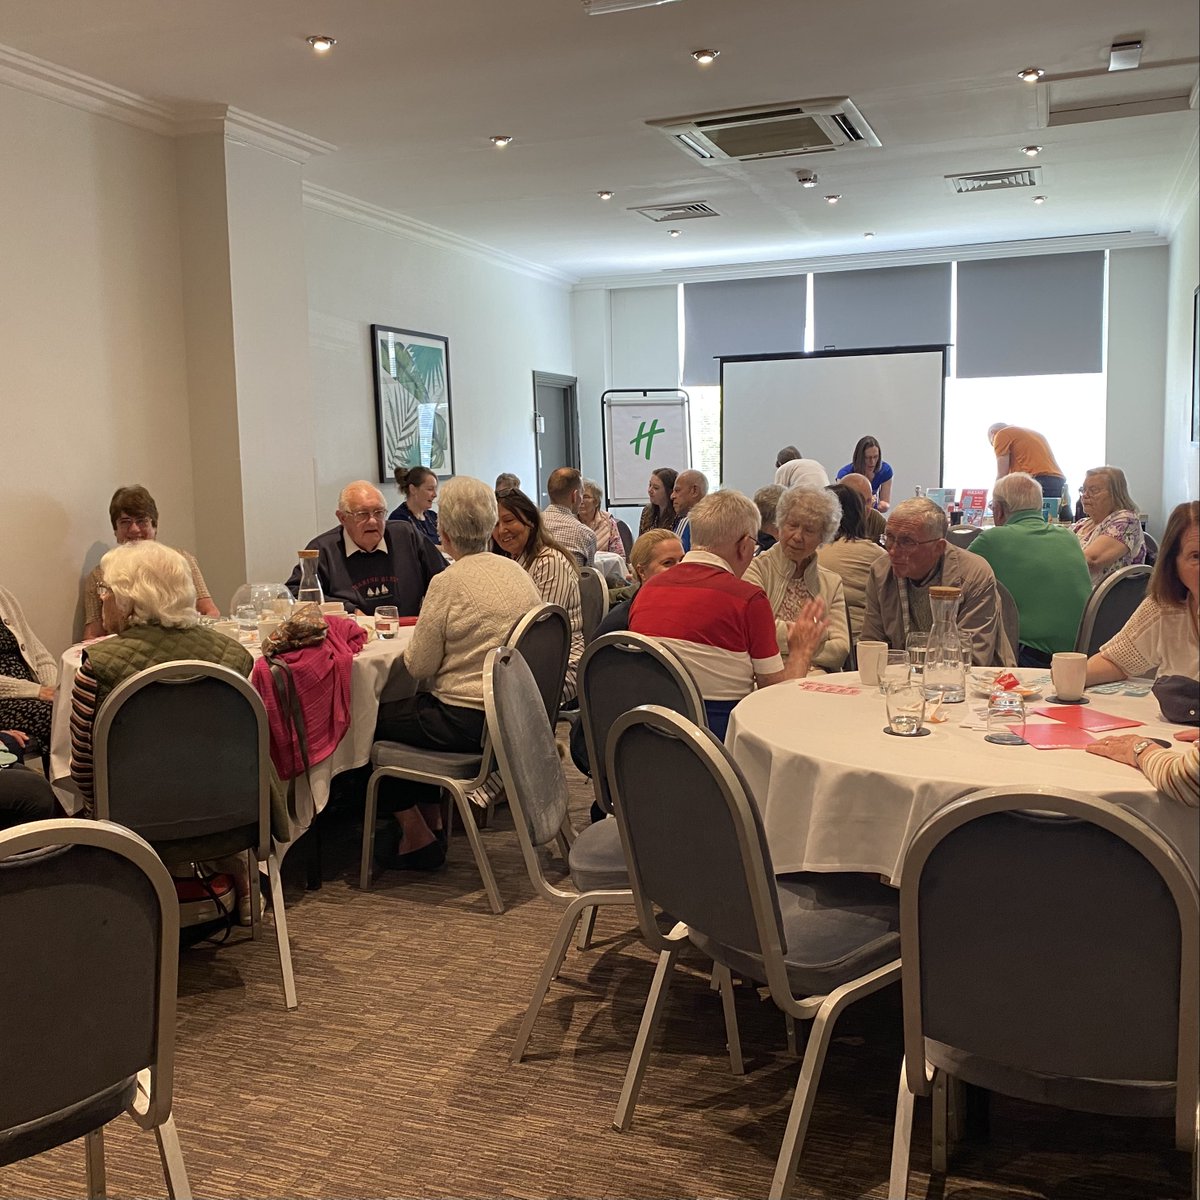 Thank you to everyone that joined us today for our Southampton coffee morning, lovely catching up with you all, so nice to see how everyone supports each other, see you all again next month #charity #support #mesothelioma